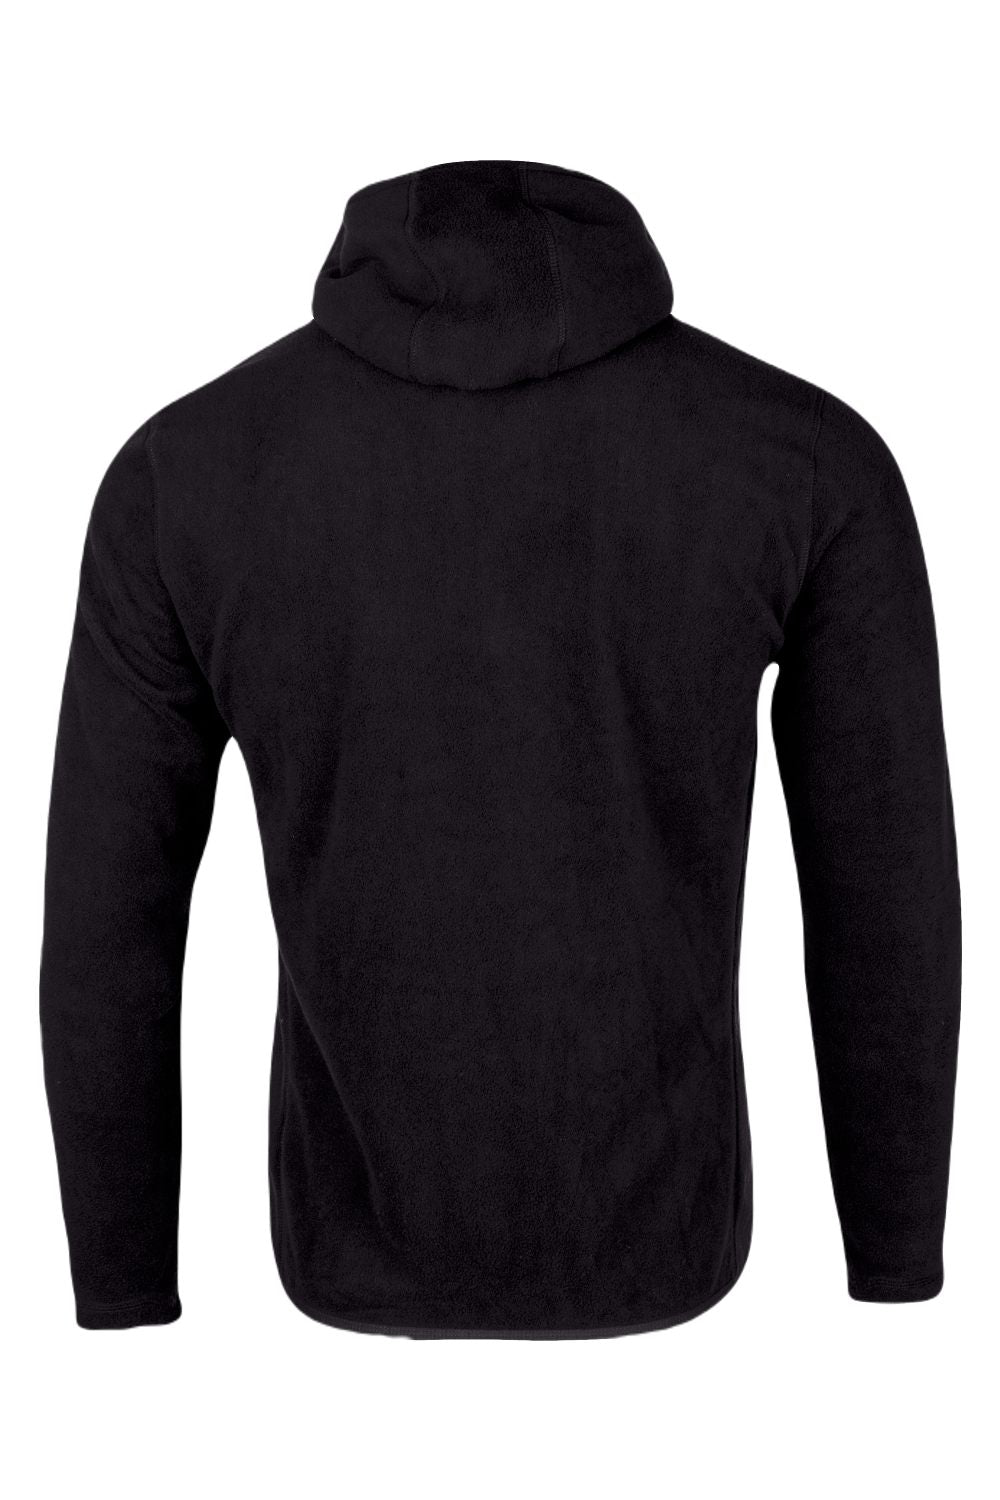 Jack Pyke Country Fleece Hoodie in Anthracite 